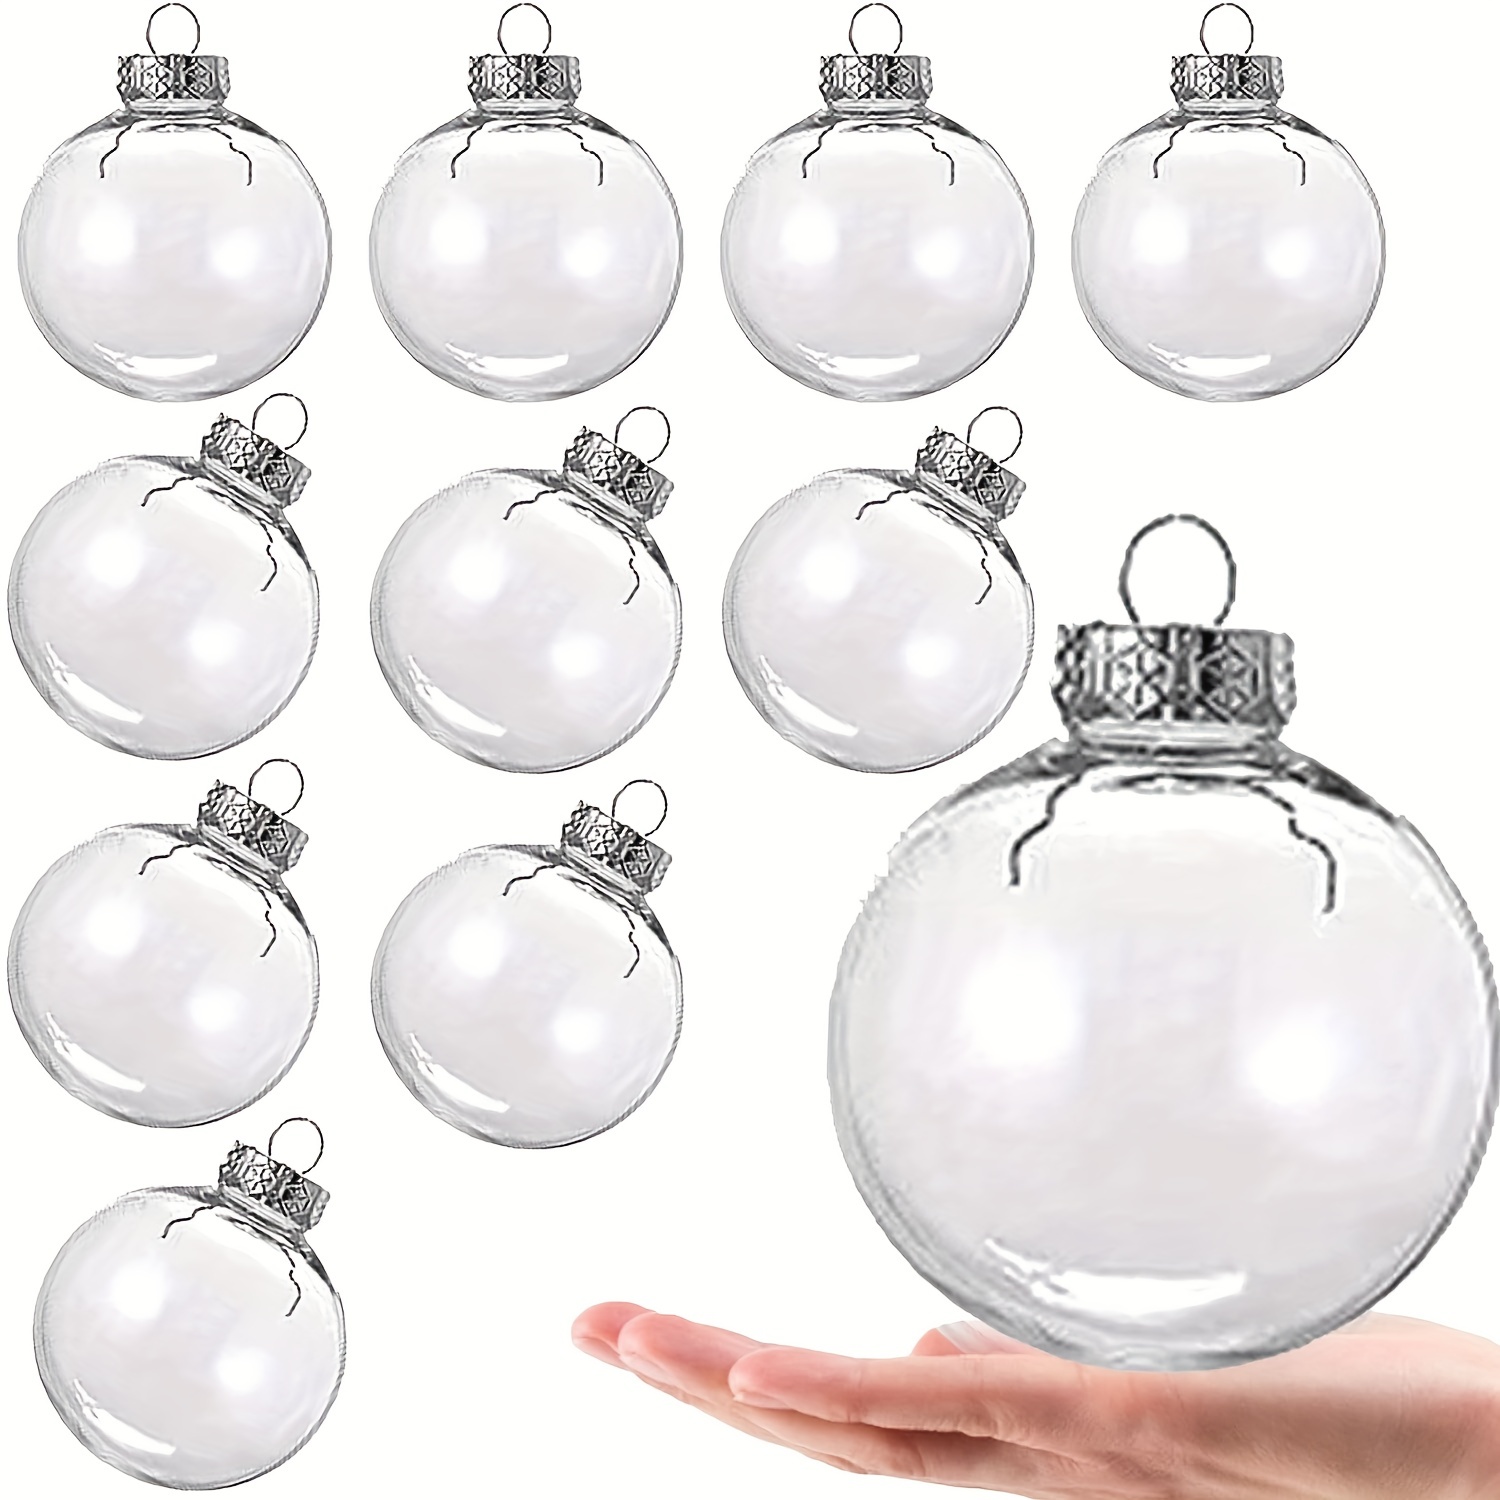 12 Pcs 3.15 Inch Christmas Clear Ornaments for Crafts Fillable Christmas  Clear Ornament Discs Plastic Balls Ornaments Flat Christmas Balls Ornaments